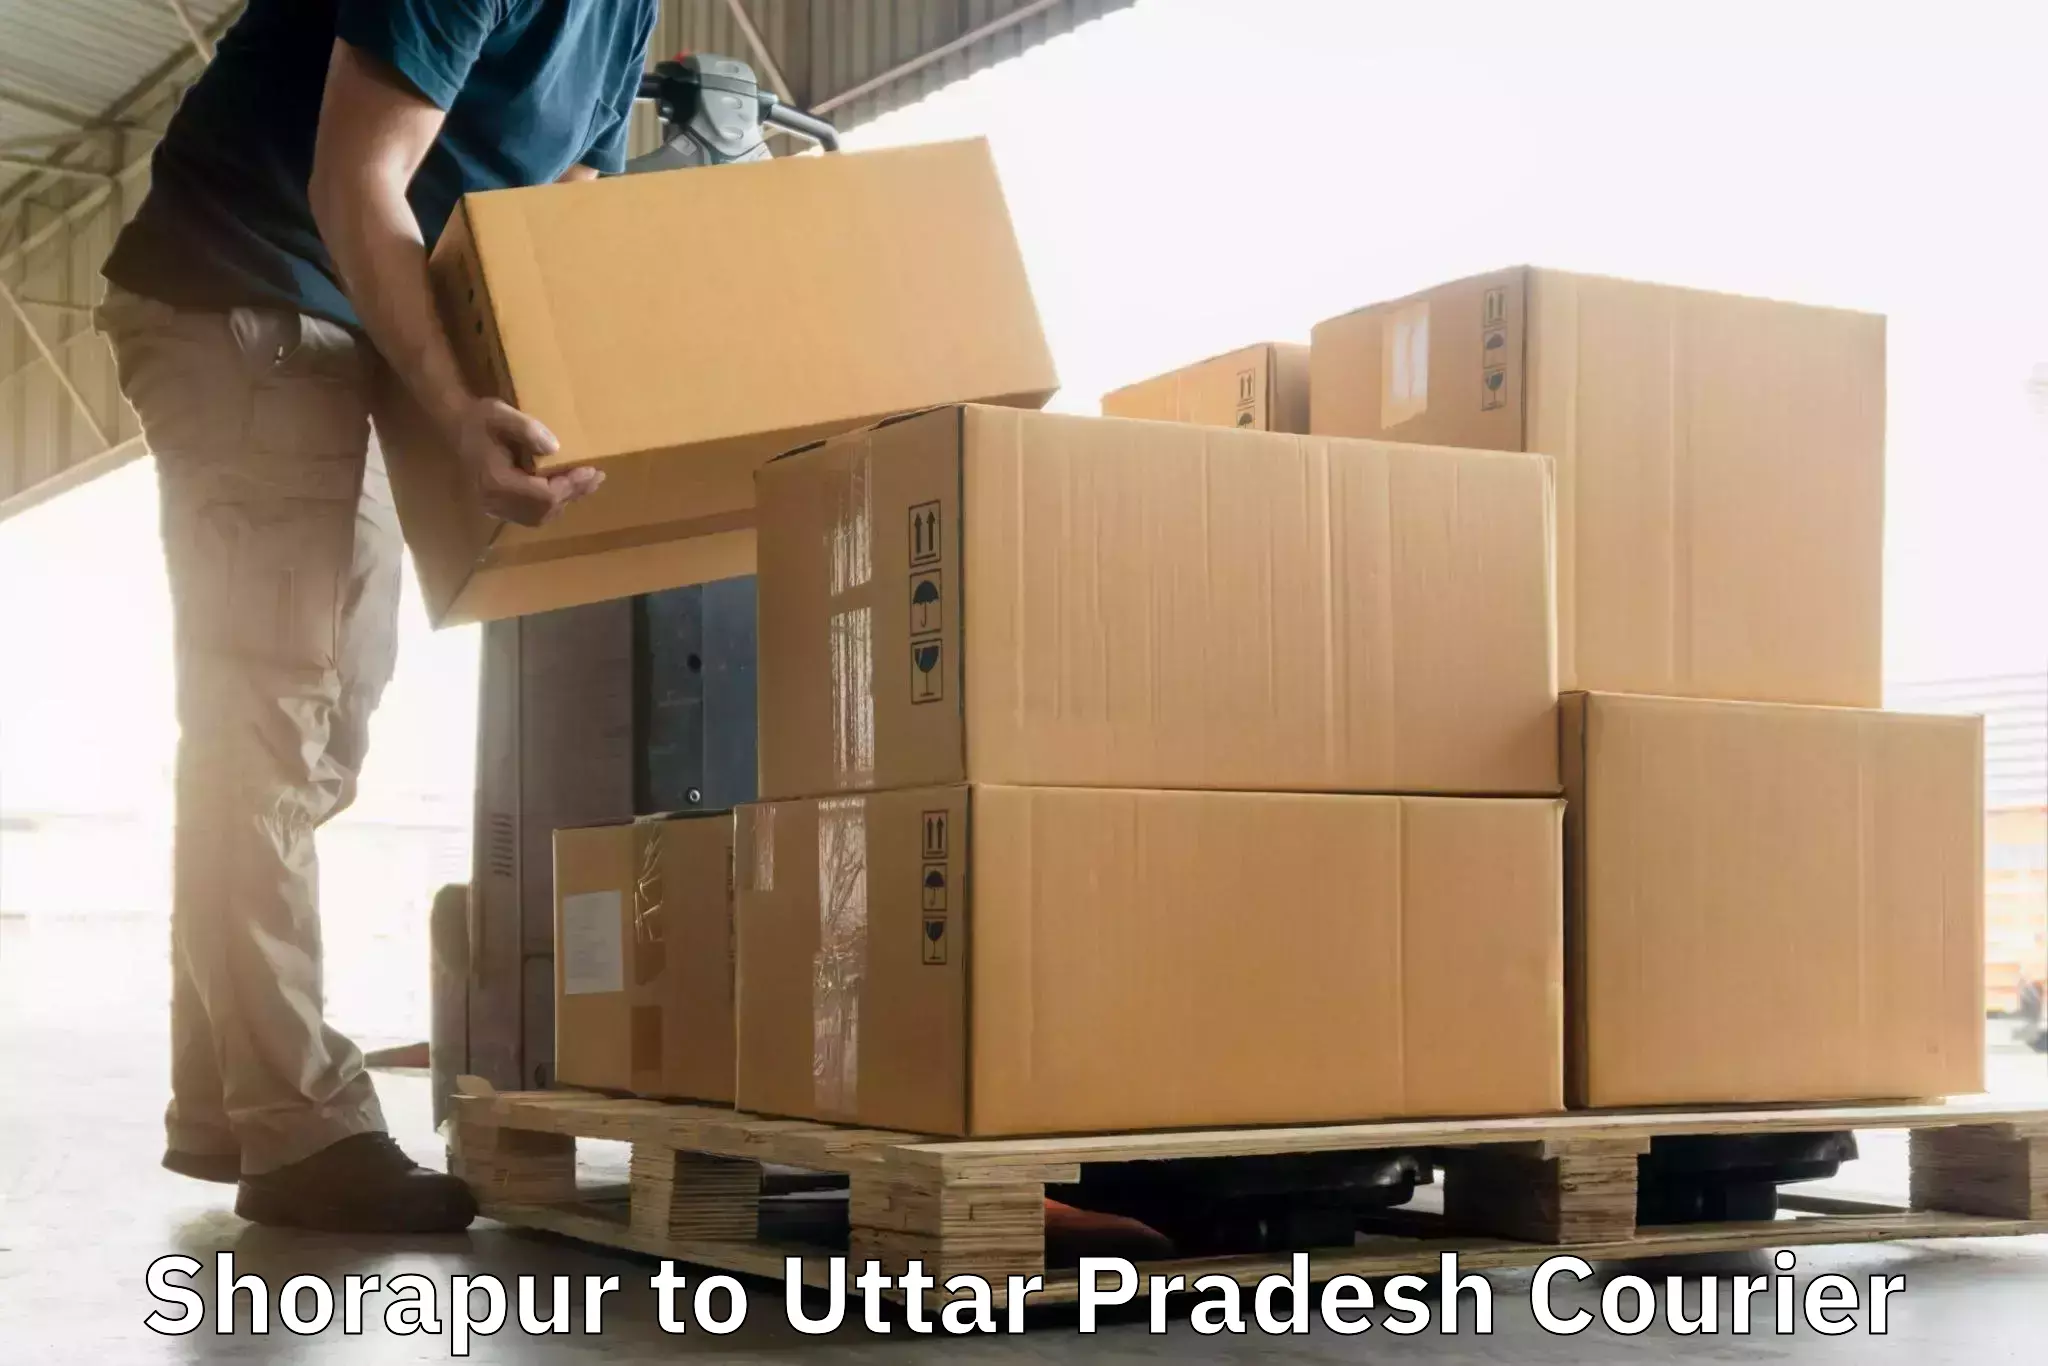 Parcel service for businesses Shorapur to Agra